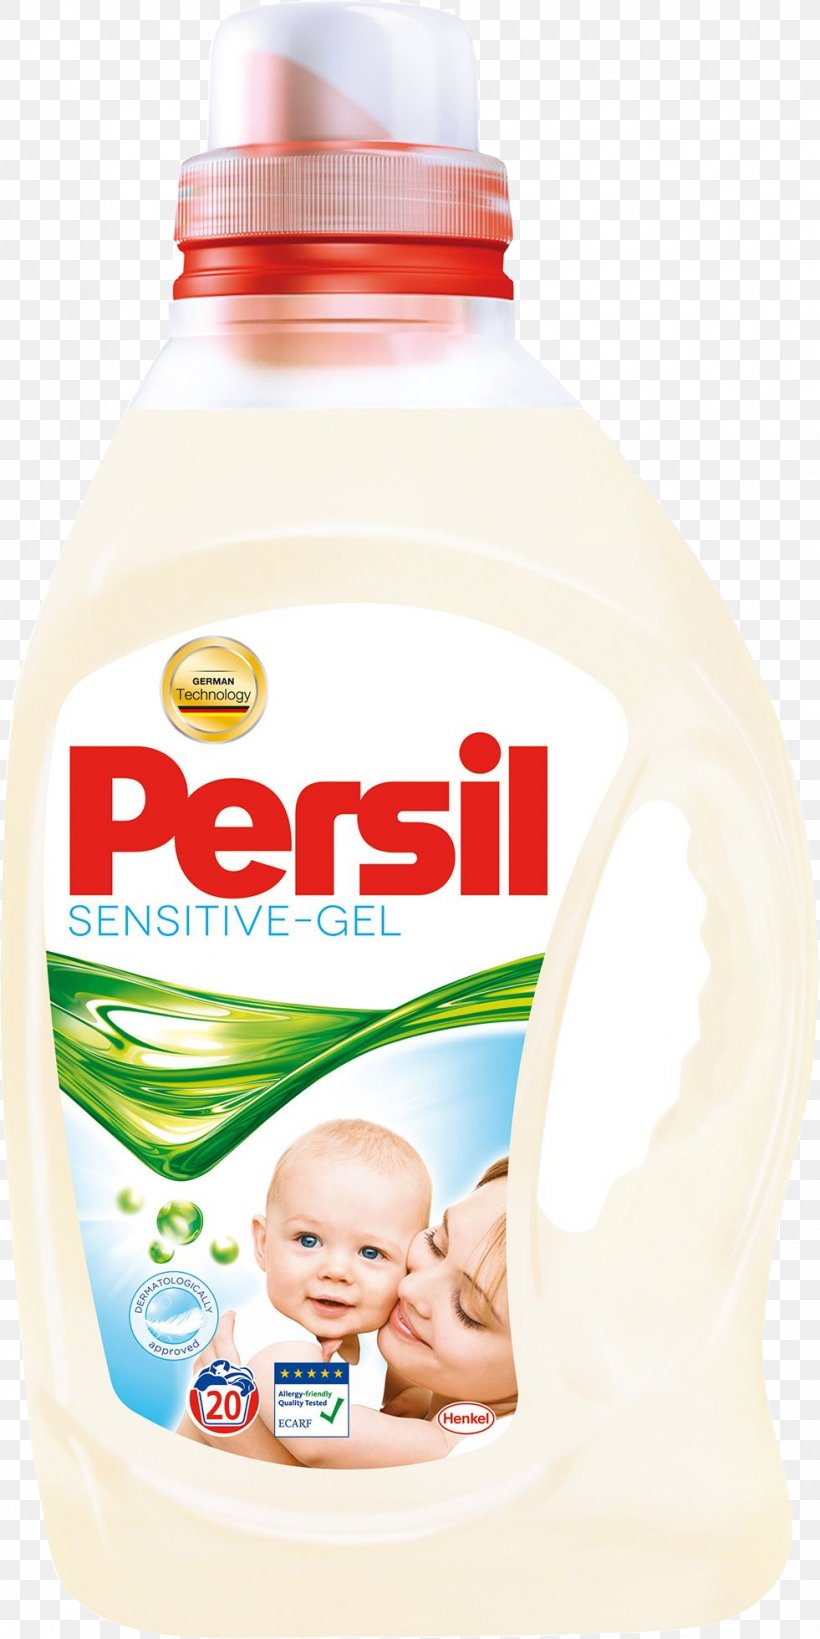 Laundry Detergent Persil Washing, PNG, 981x1961px, Laundry Detergent, Ariel, Cleaning, Detergent, Dishwashing Liquid Download Free